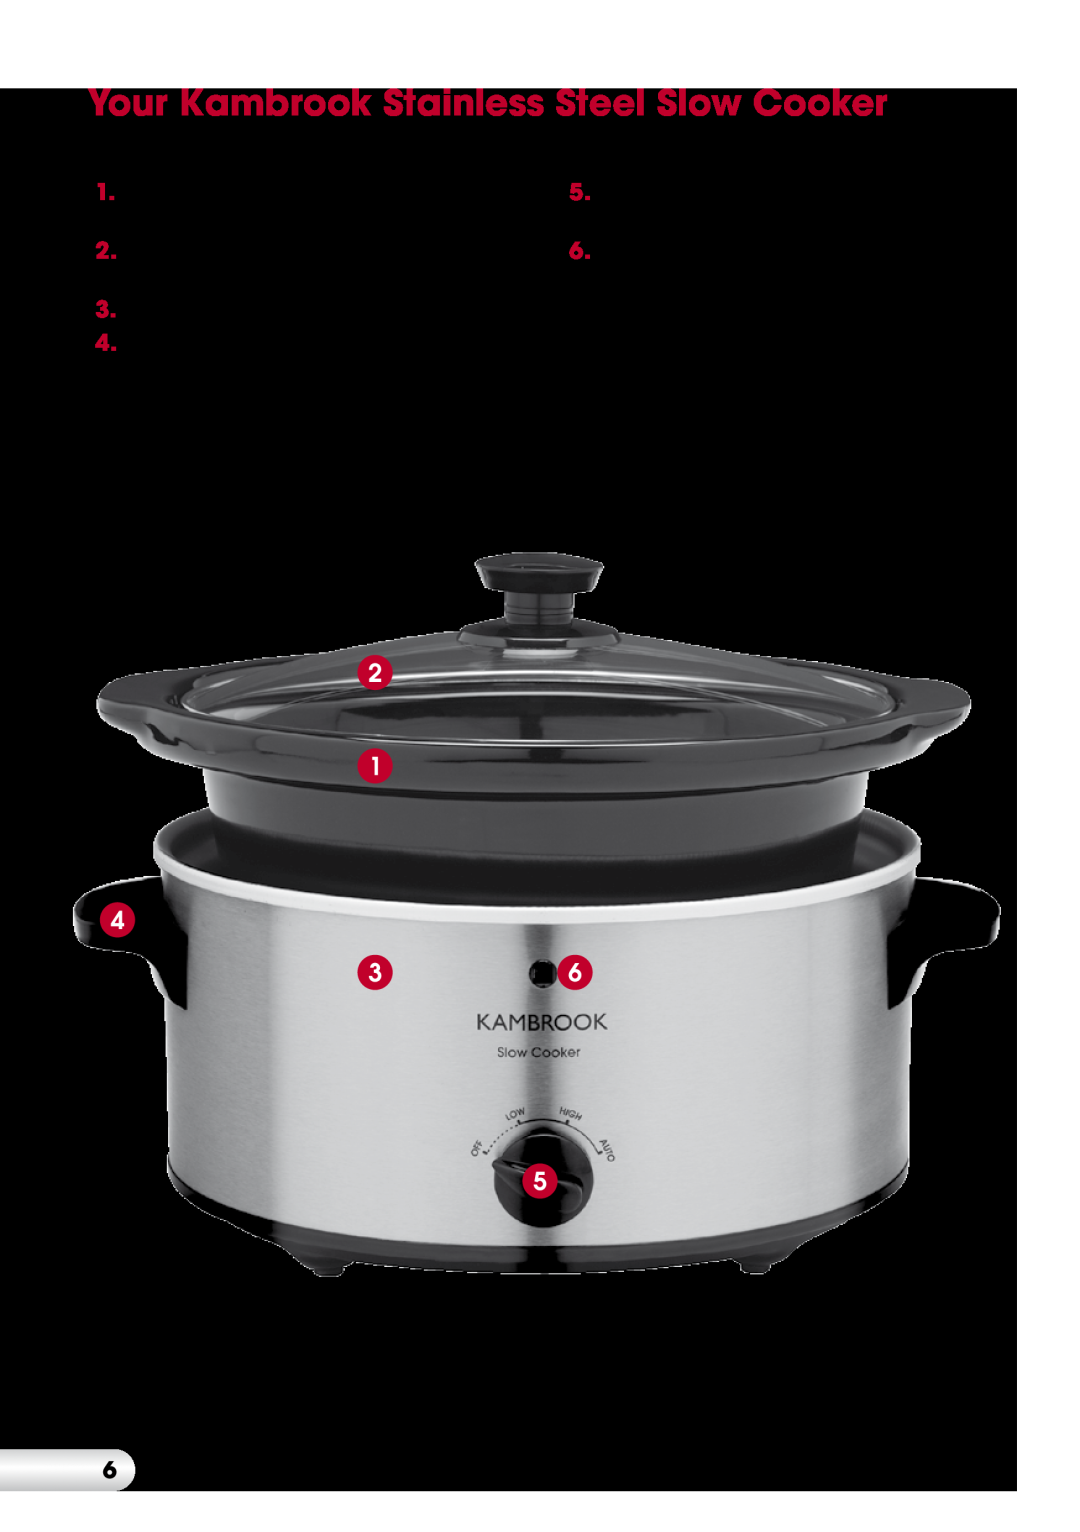 Kambrook KSC360 Your Kambrook Stainless Steel Slow Cooker, Removable crockery bowl with 3 litre capacity, Power ‘ON’ Light 